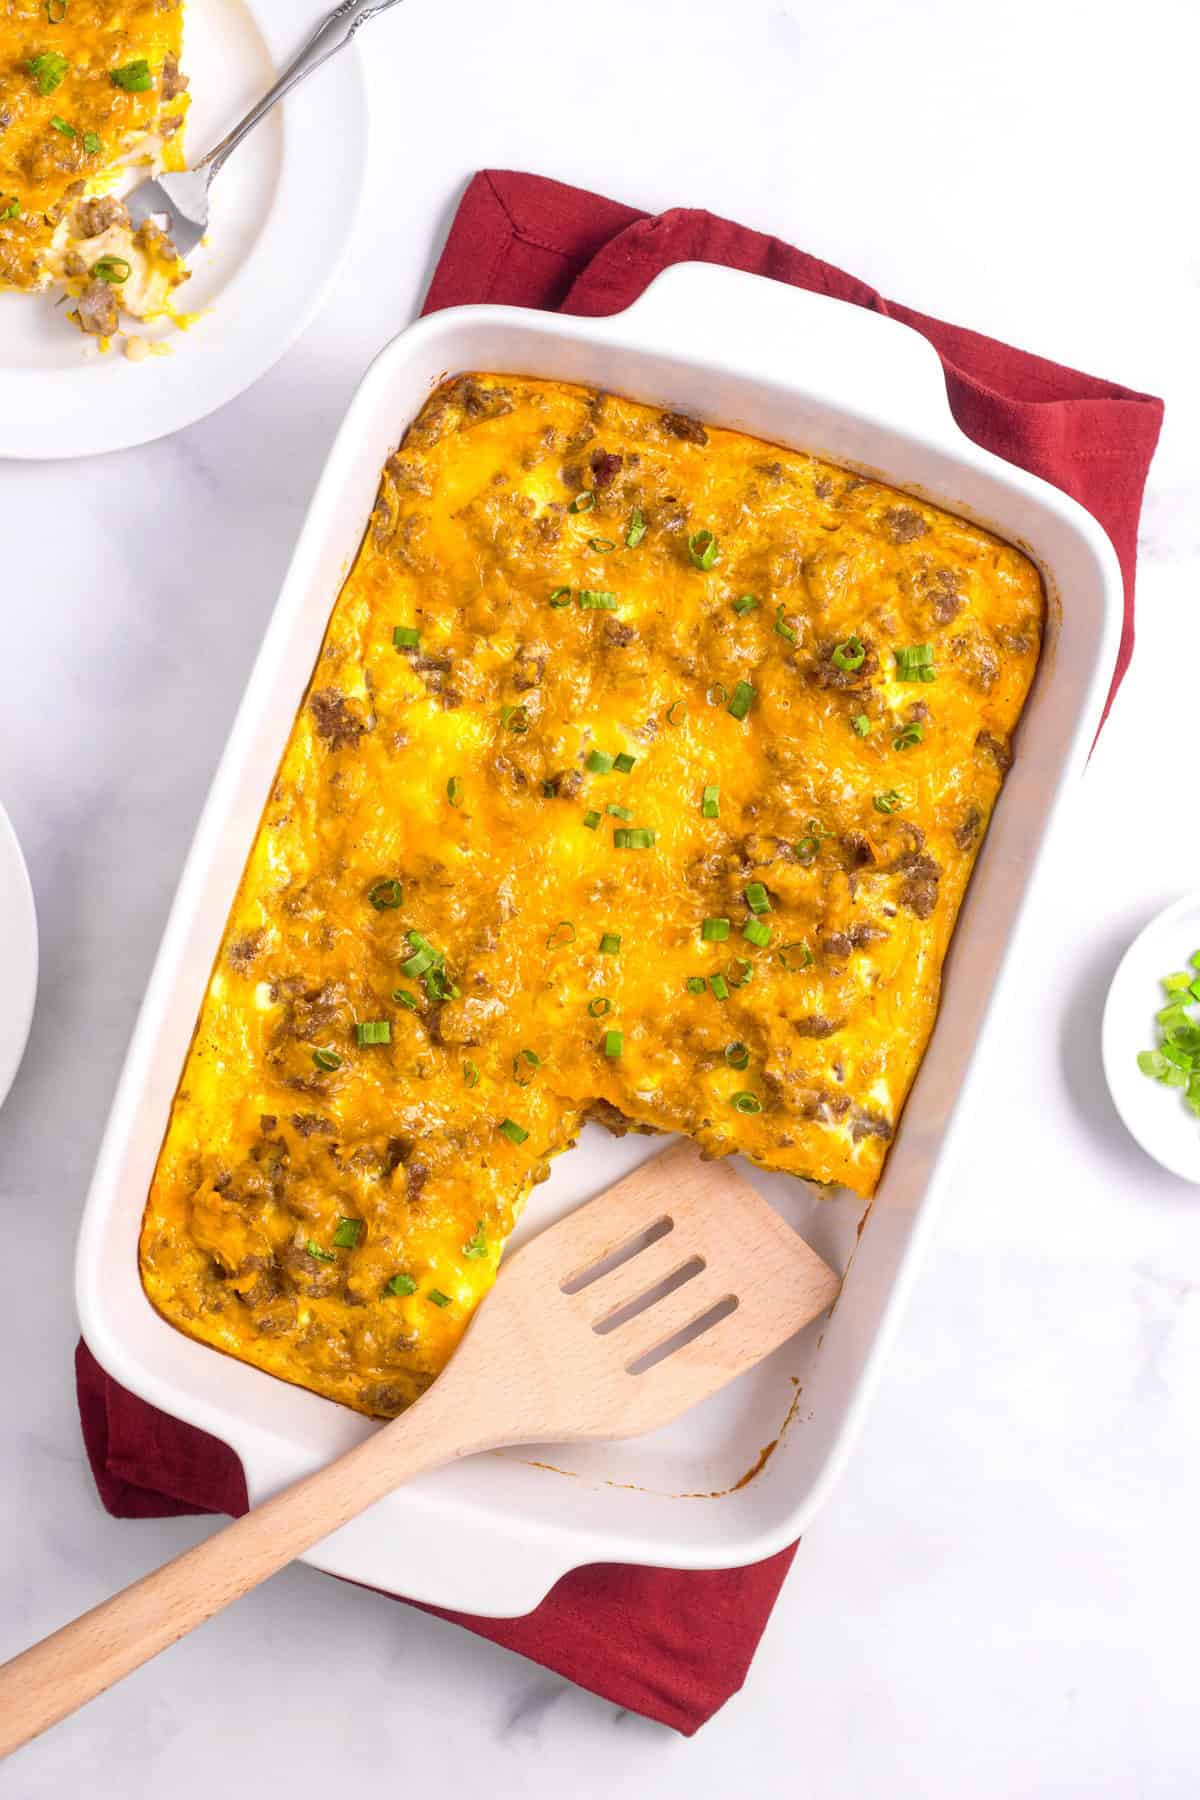 breakfast casserole with biscuits baked in a casserole dish